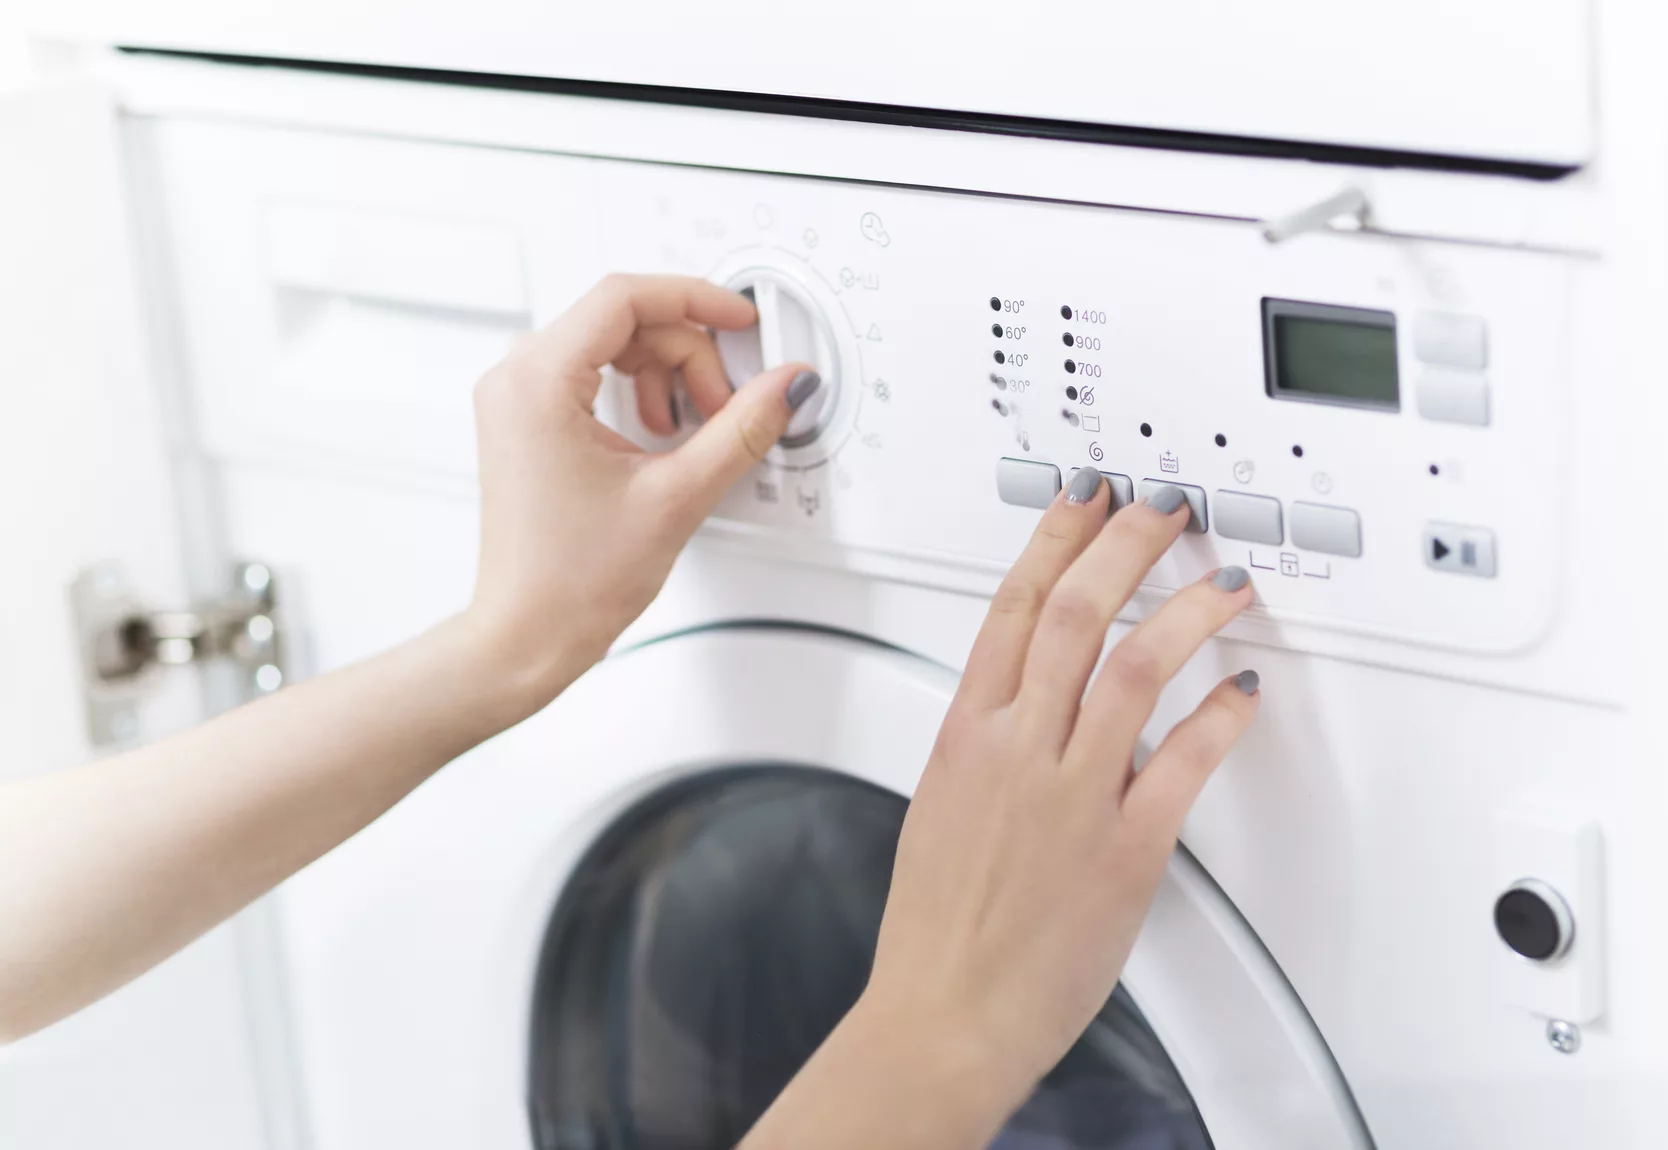 How To Turn On A Washing Machine